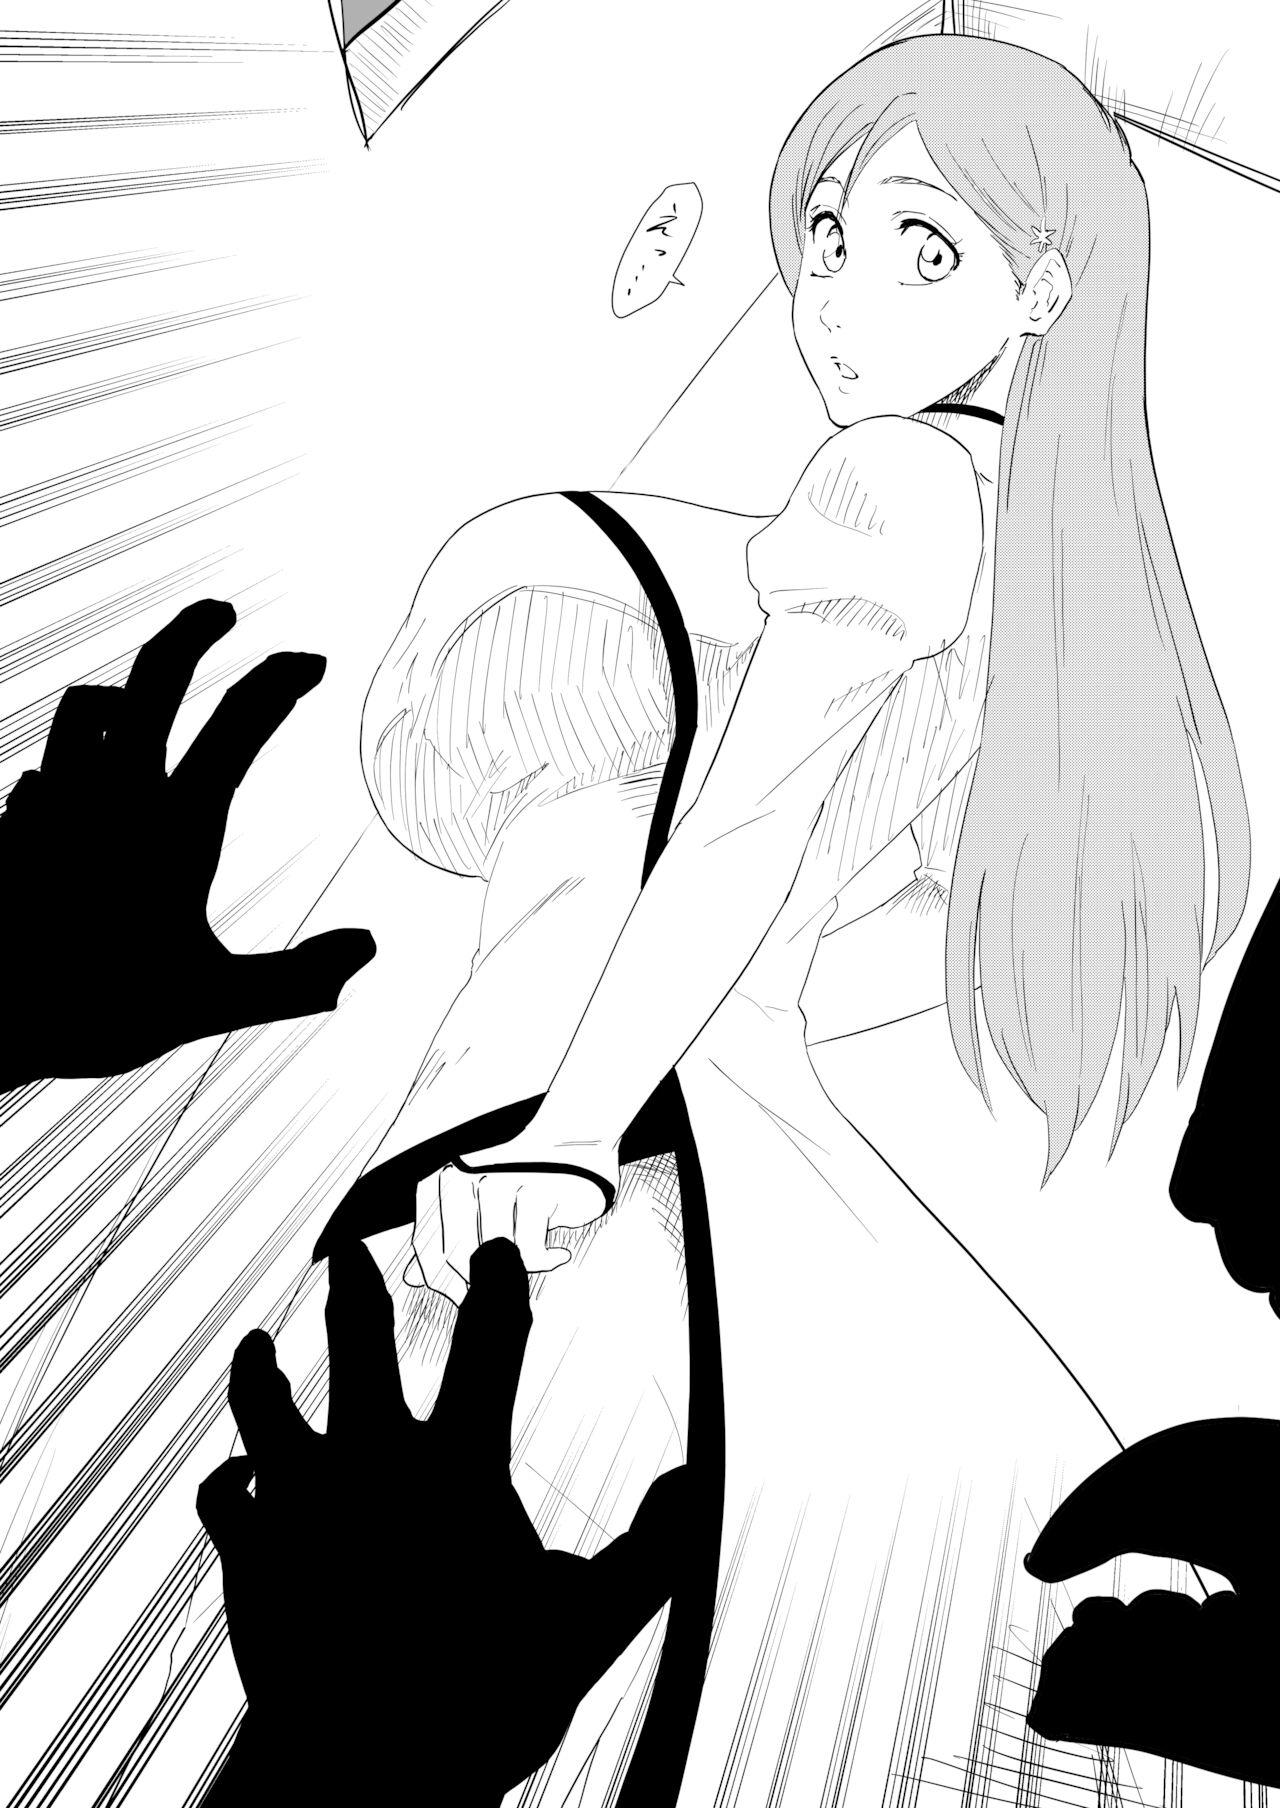 Orihime is attacked by goblin-like hollows 3